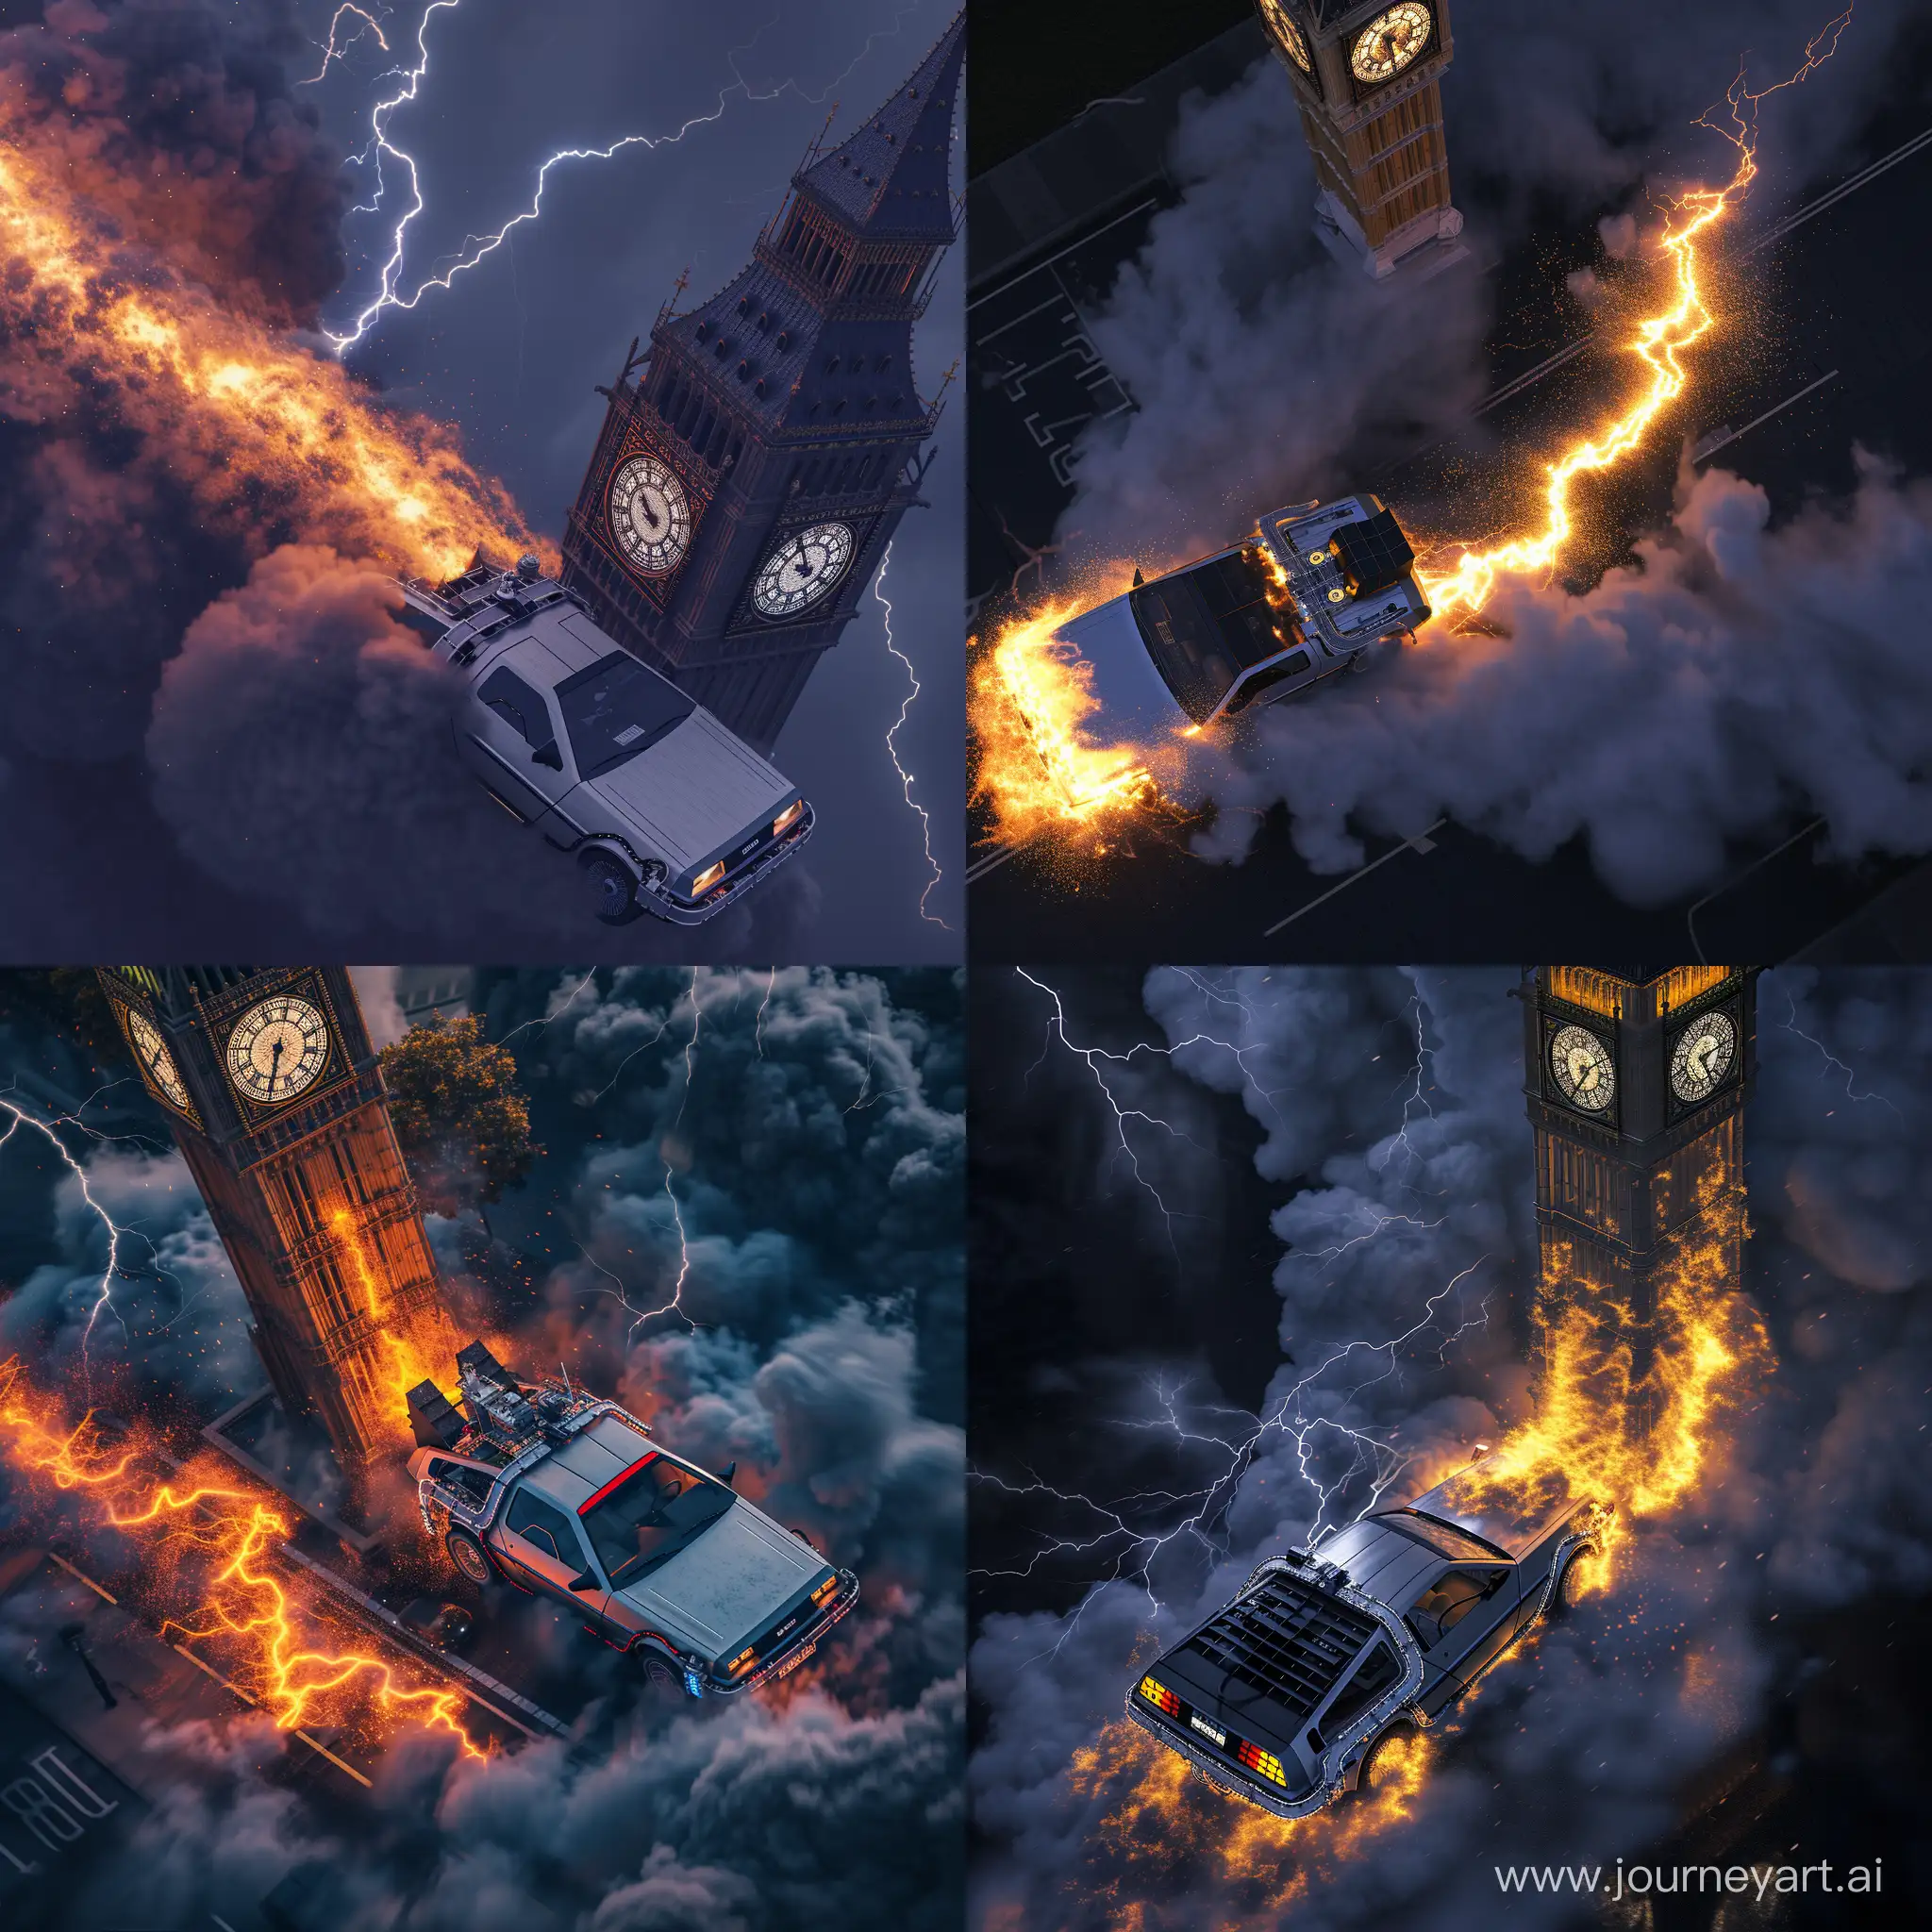 DeLorean spreading away leaving trail of fire behind and smoke, lightning, clock tower, time machine, aerial shot, photorealistic, 8k